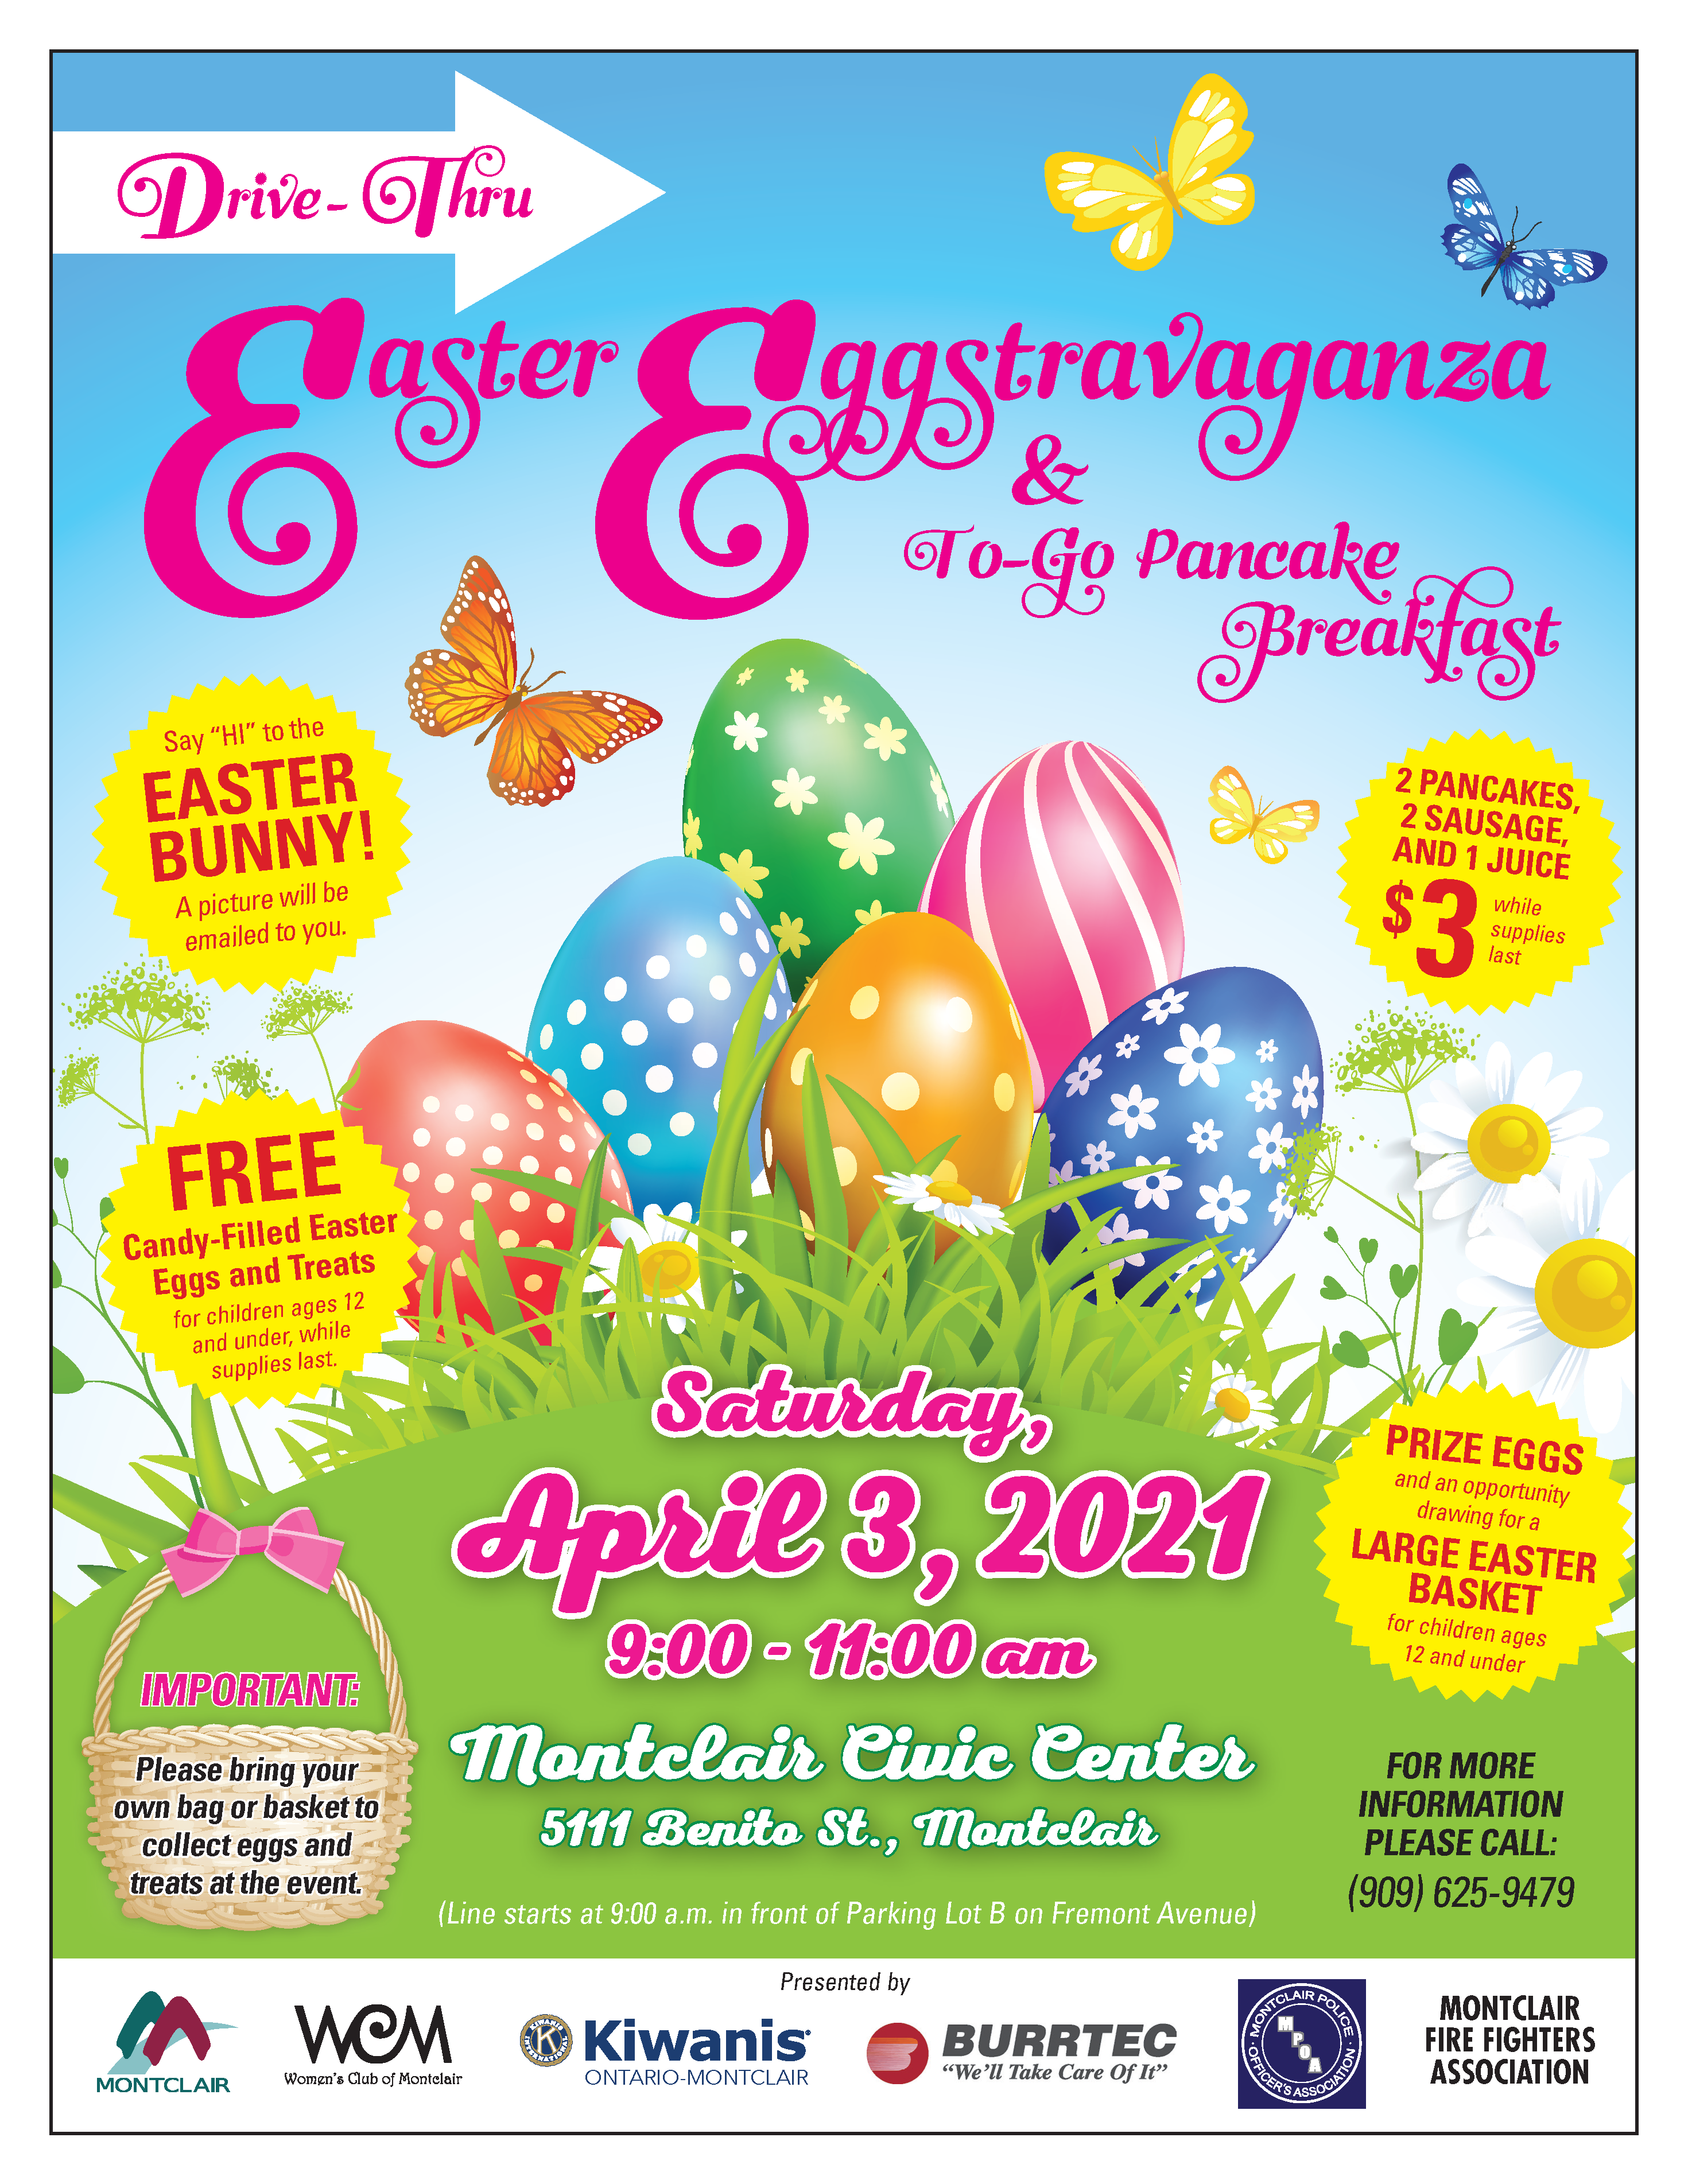 Drive-Thru Easter Eggstravaganza & To-Go Pancake Breakfast Saturday April 3, 2021, from 9:00-11:00 a.m. at the Montclair Civic Center Parking Lot, 5111 Benito Street, Montclair, CA 91763. Line starts at 9:00 a.m. in front of Parking Lot B (behind the library) on Fremont Avenue. Say "Hi" to the Easter Bunny! A picture will be emailed to you. 2 pancakes, 2 sausages, and 1 juice $3 while supplies last. Free candy-filled easter eggs and treats for children ages 12 and under, while supplies last. Prize eggs and an opportunity drawing for a large easter basket for children ages 12 and under. For more information please call (909) 625-9479. Sponsored by the City of Montclair, the Women's Club of Montclair, Kiwanis Ontario-Montclair, Burrtec Waste Industries, and the Montclair Firefighters Association.